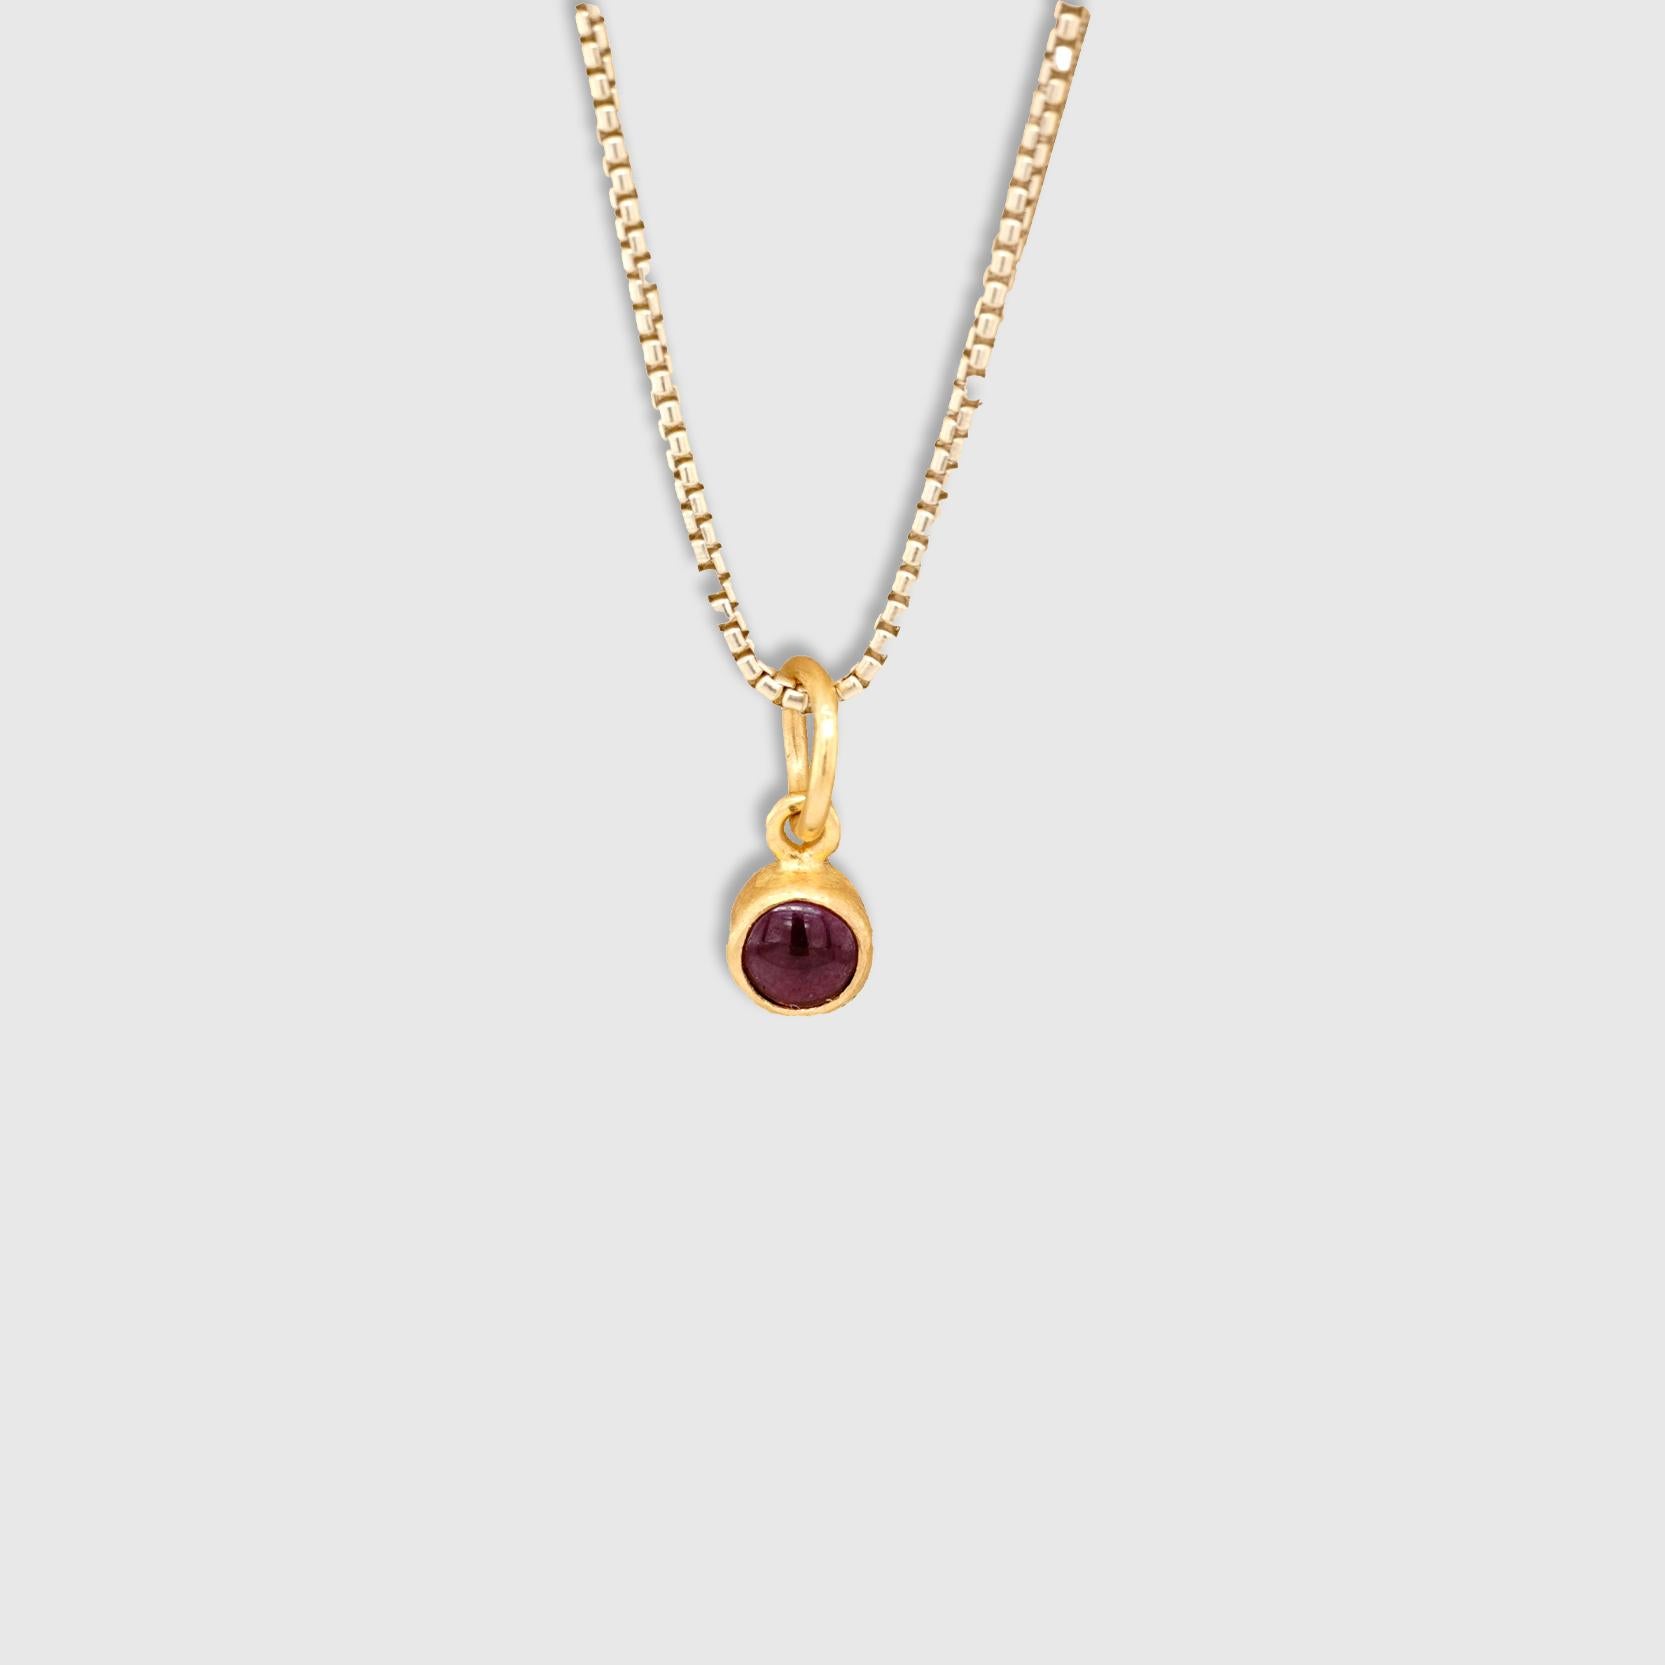 Women's or Men's 24K Gold Round Smooth Red Garnet Miniature Pendant Necklace, January Birthstone For Sale